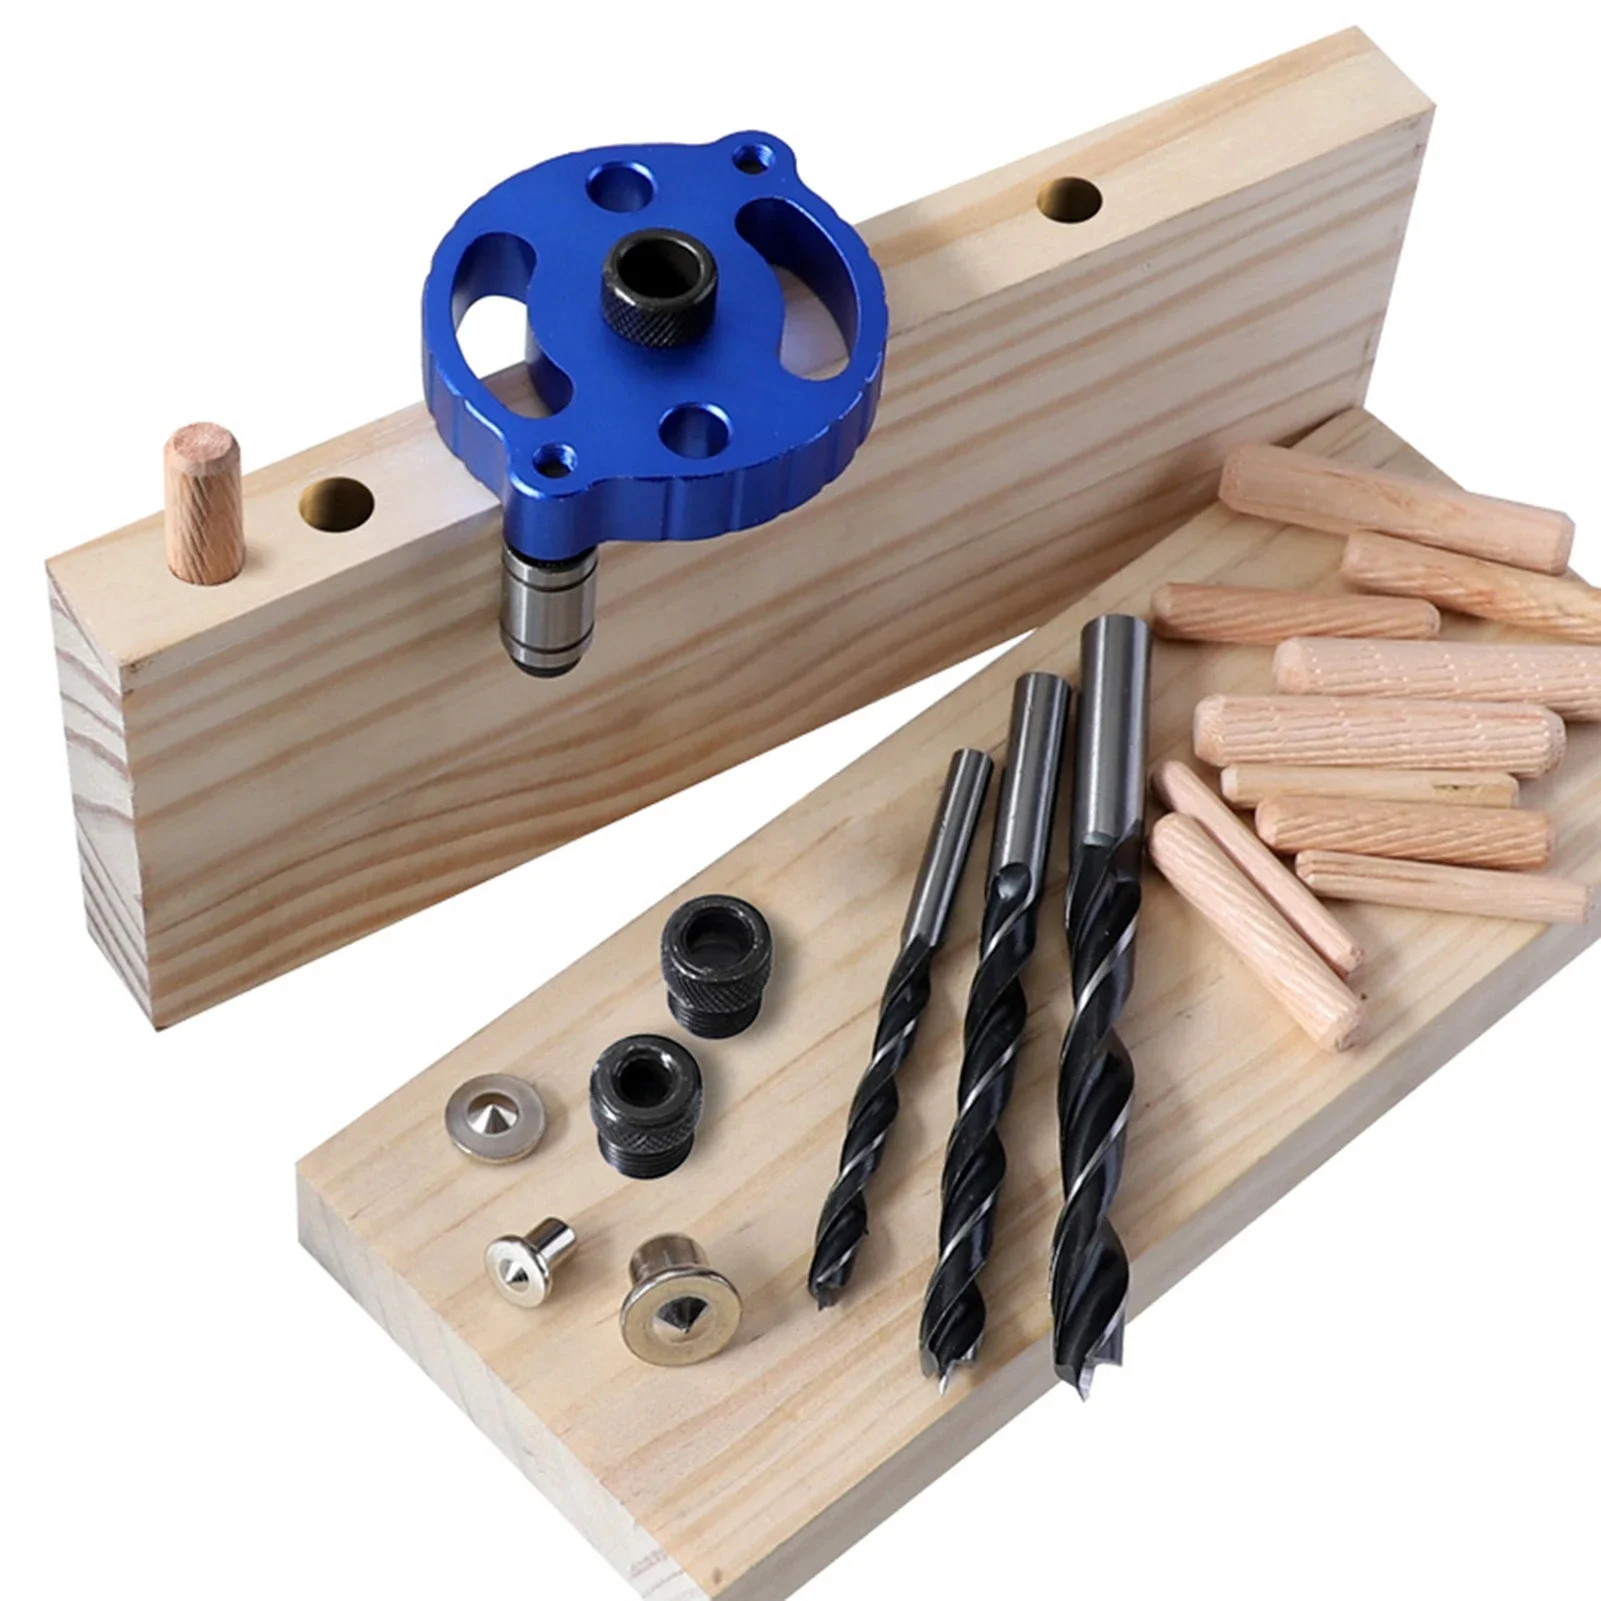 Drilling Hole Opener Woodworking Guide Device Tools for Precise and Practical Holes in Furniture Factories and Craft Sweet woodworking hole opener drill guide device precise practical tools for drilling holes furniture factories and craft sweet